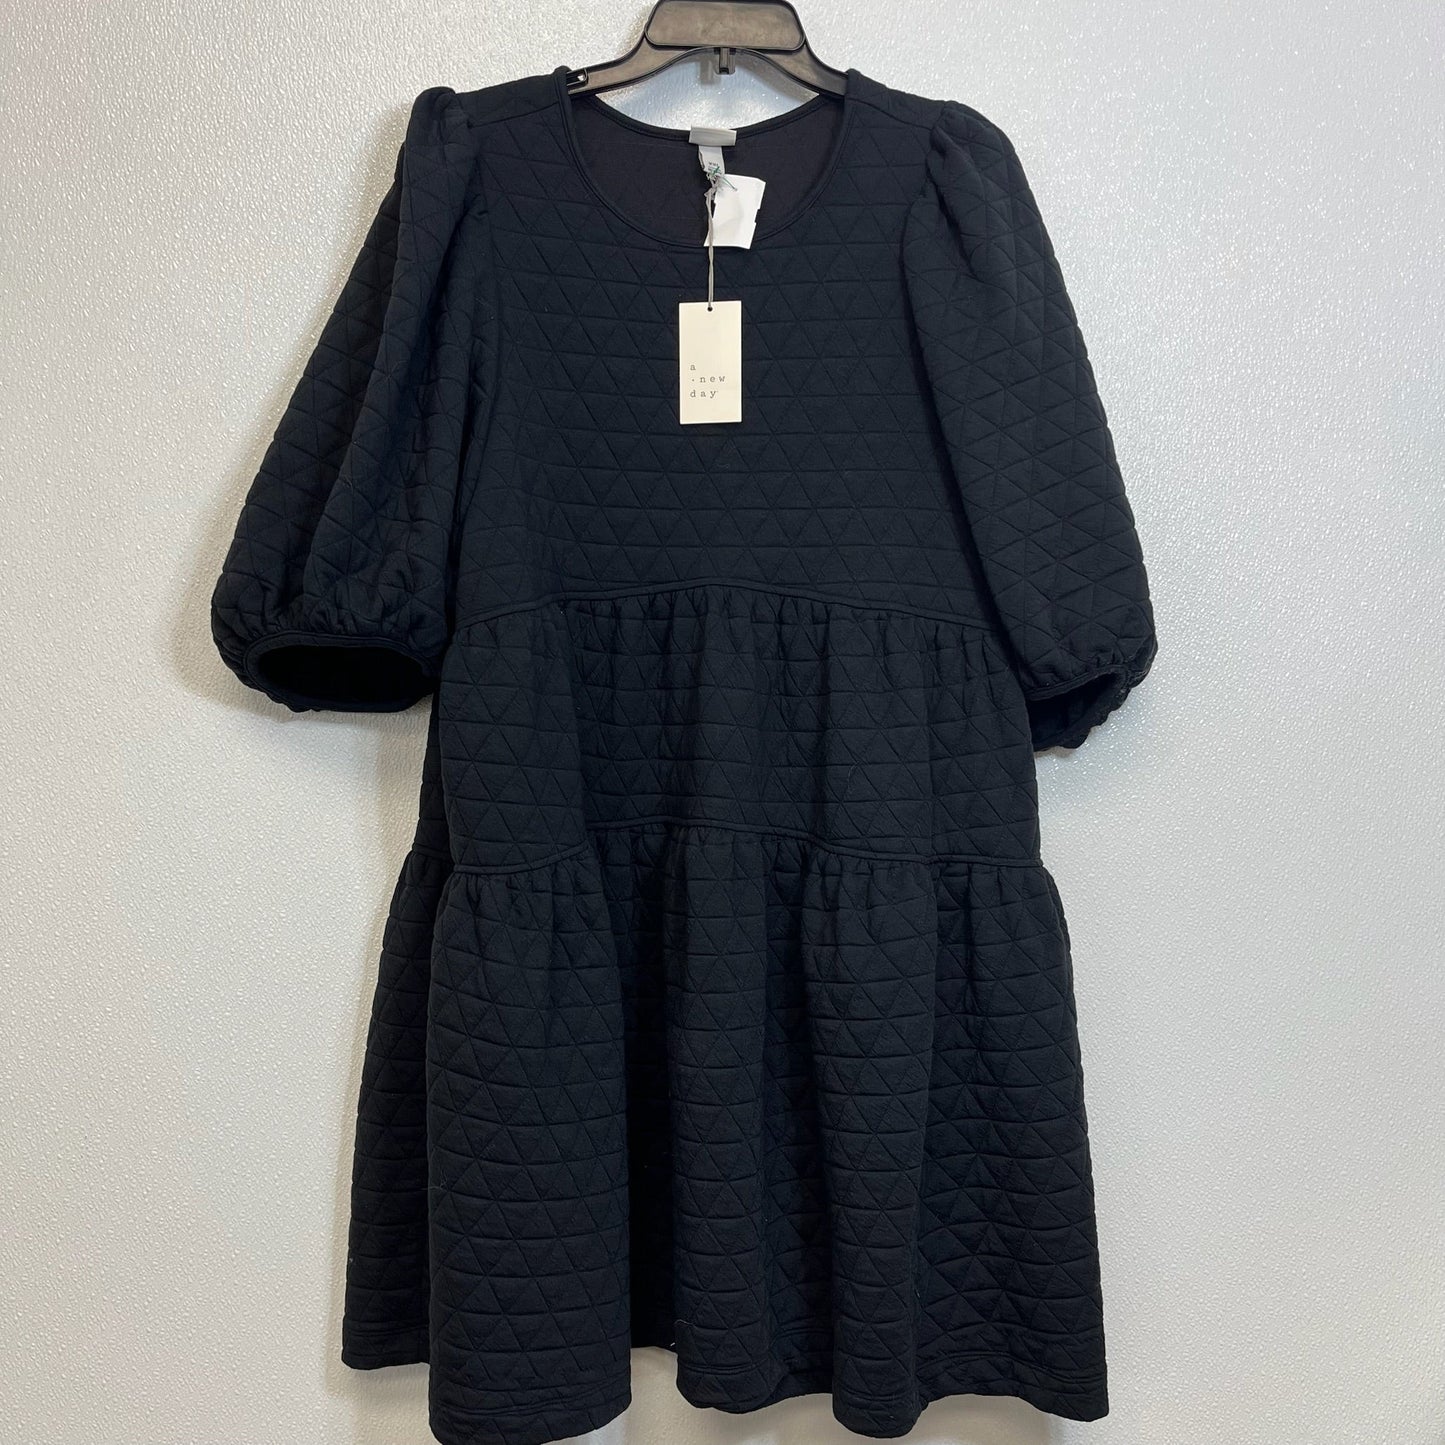 Black Dress Casual Short A New Day, Size Xxl